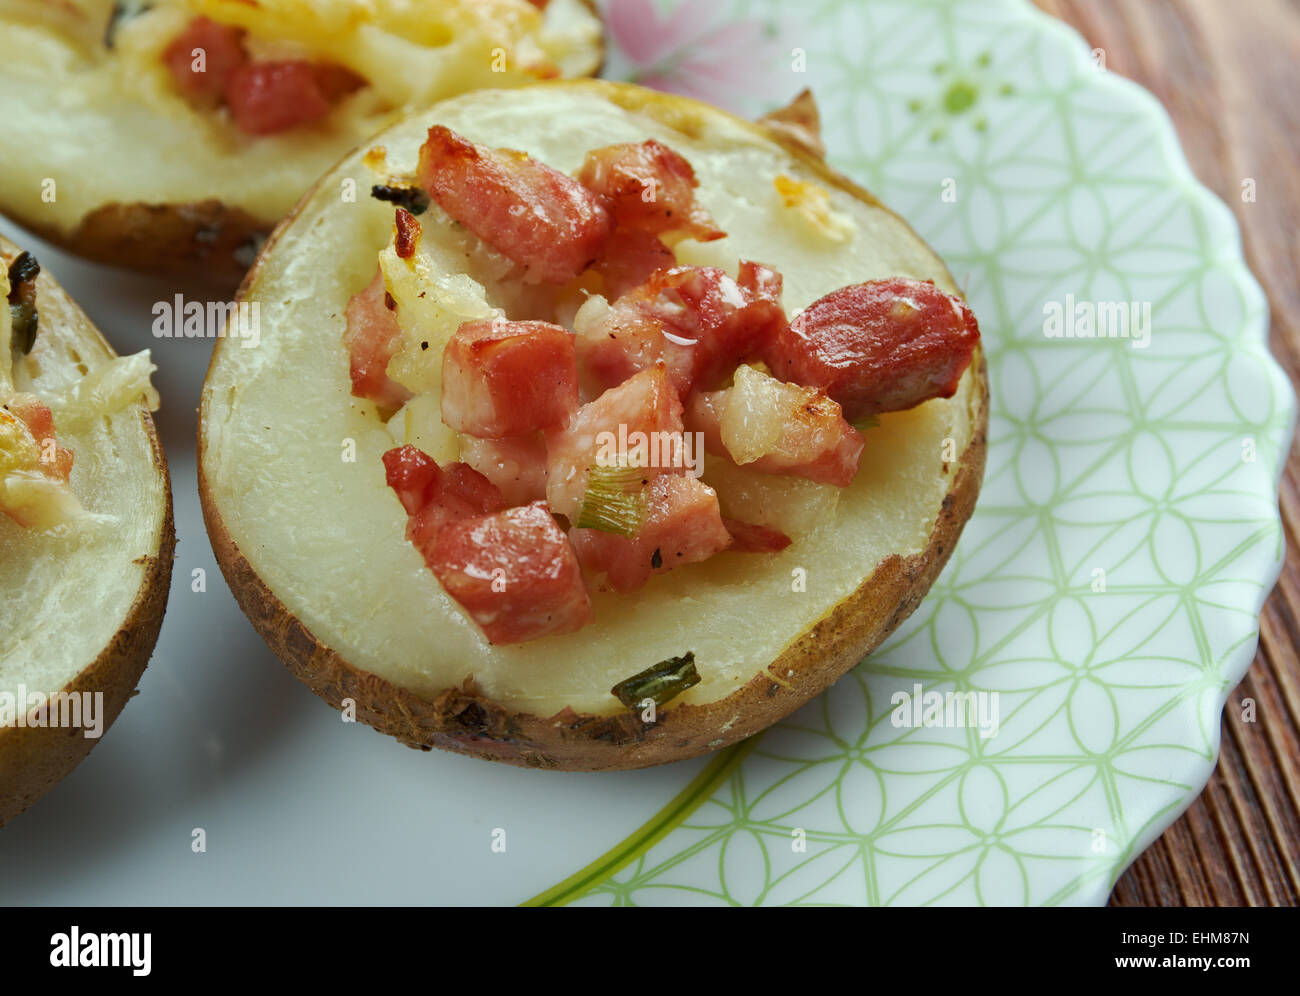 Stuffed Baked Potatoes with ham and cheddar cheese Stock Photo